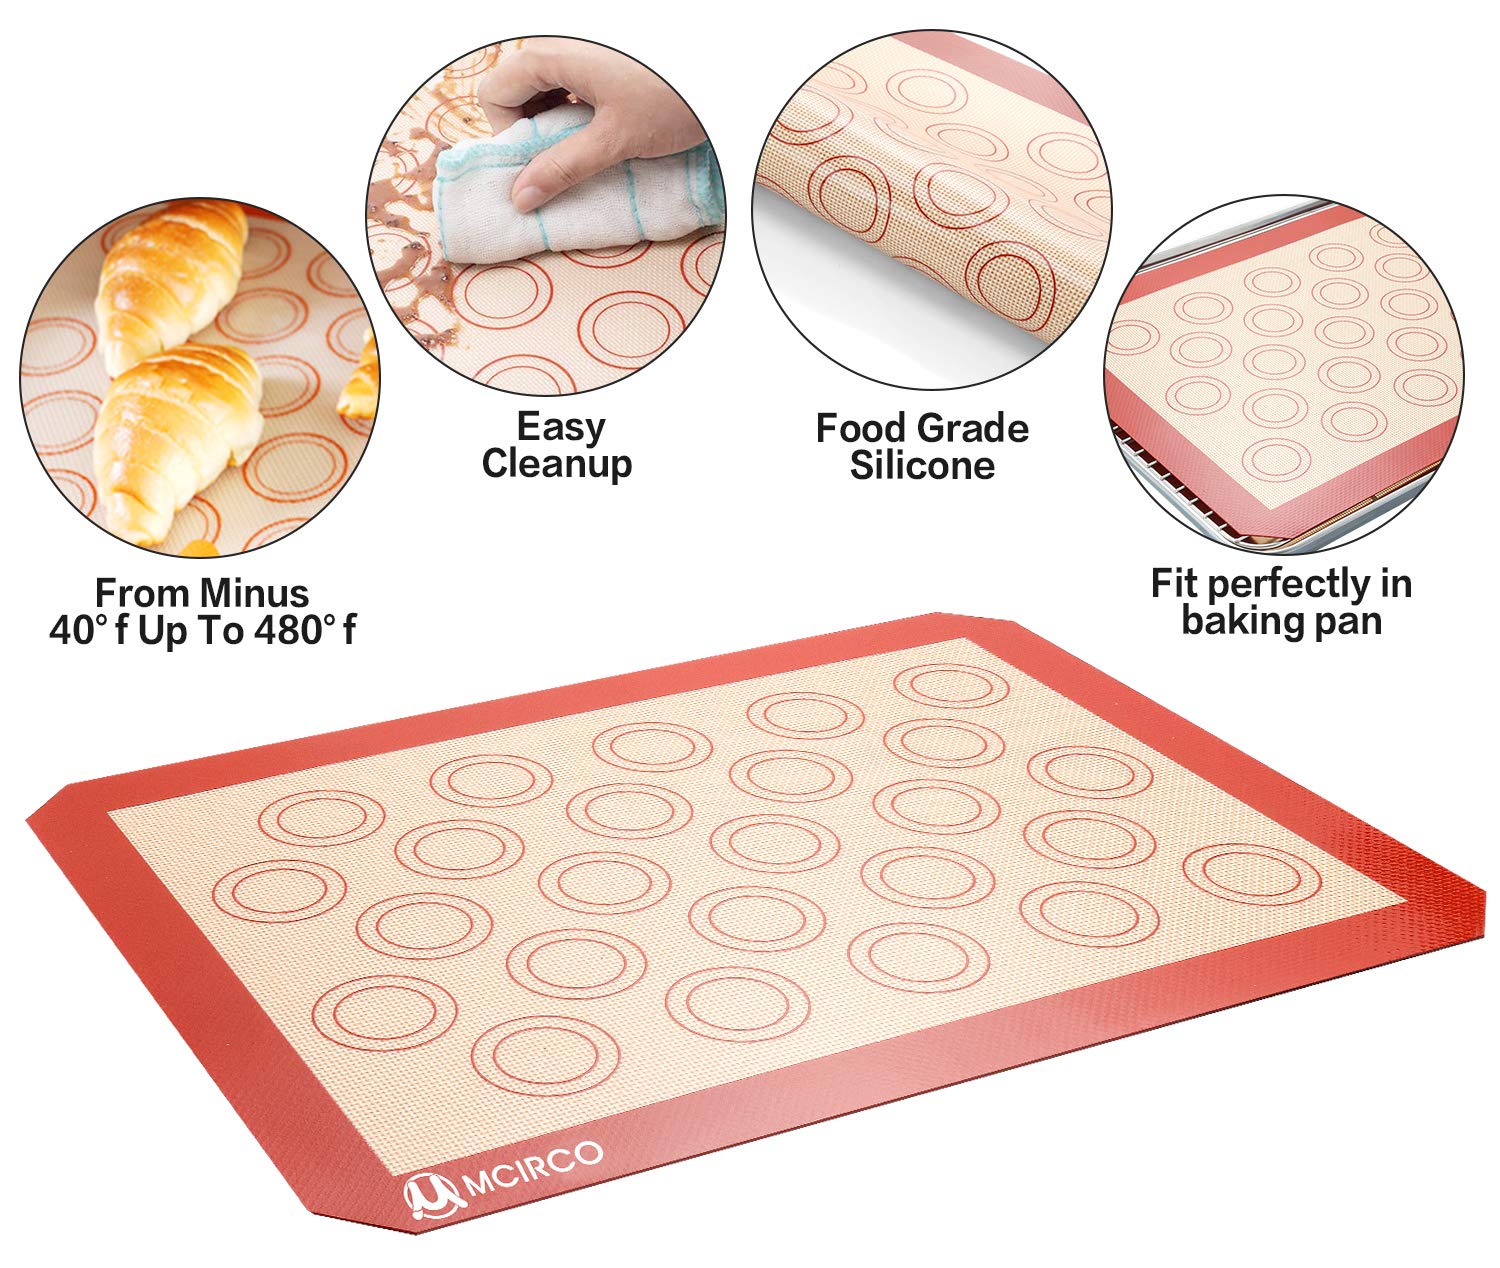 Stainless Steel Baking Sheet Tray Cooling Rack with Silicone Baking Mat Set, Cookie Pan with Cooling Rack, Set of 9 (3 Sheets + 3 Racks + 3 Mats), Non Toxic, Heavy Duty & Easy Clean